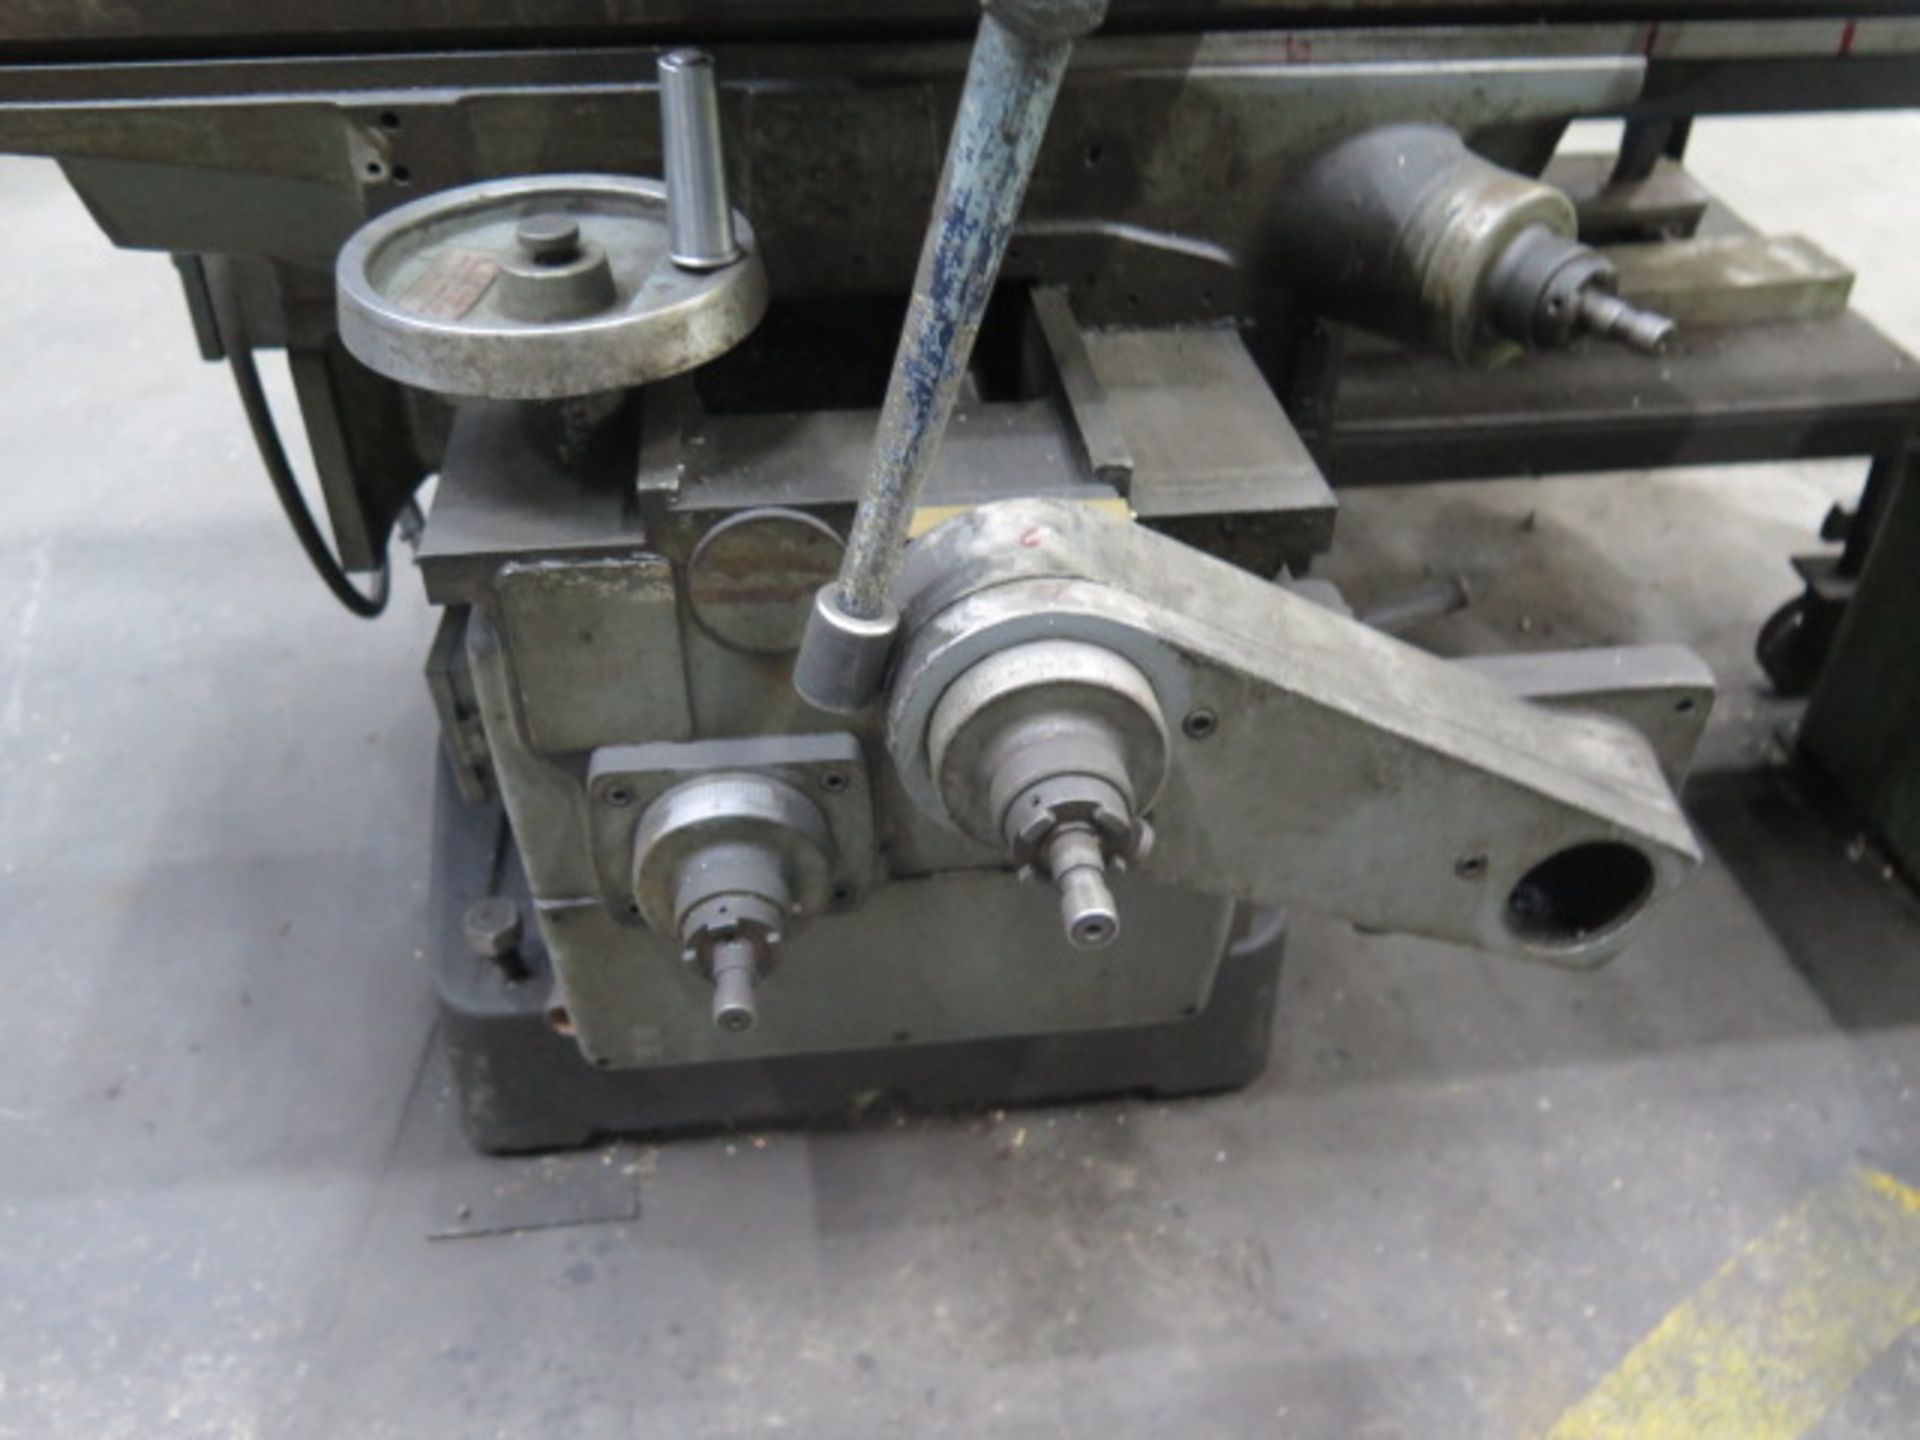 Gorton 2-30 Auto Trace Master Vertical Mill w/ Universal Kwik-Switch Taper Spindle, SOLD AS IS - Bild 8 aus 9